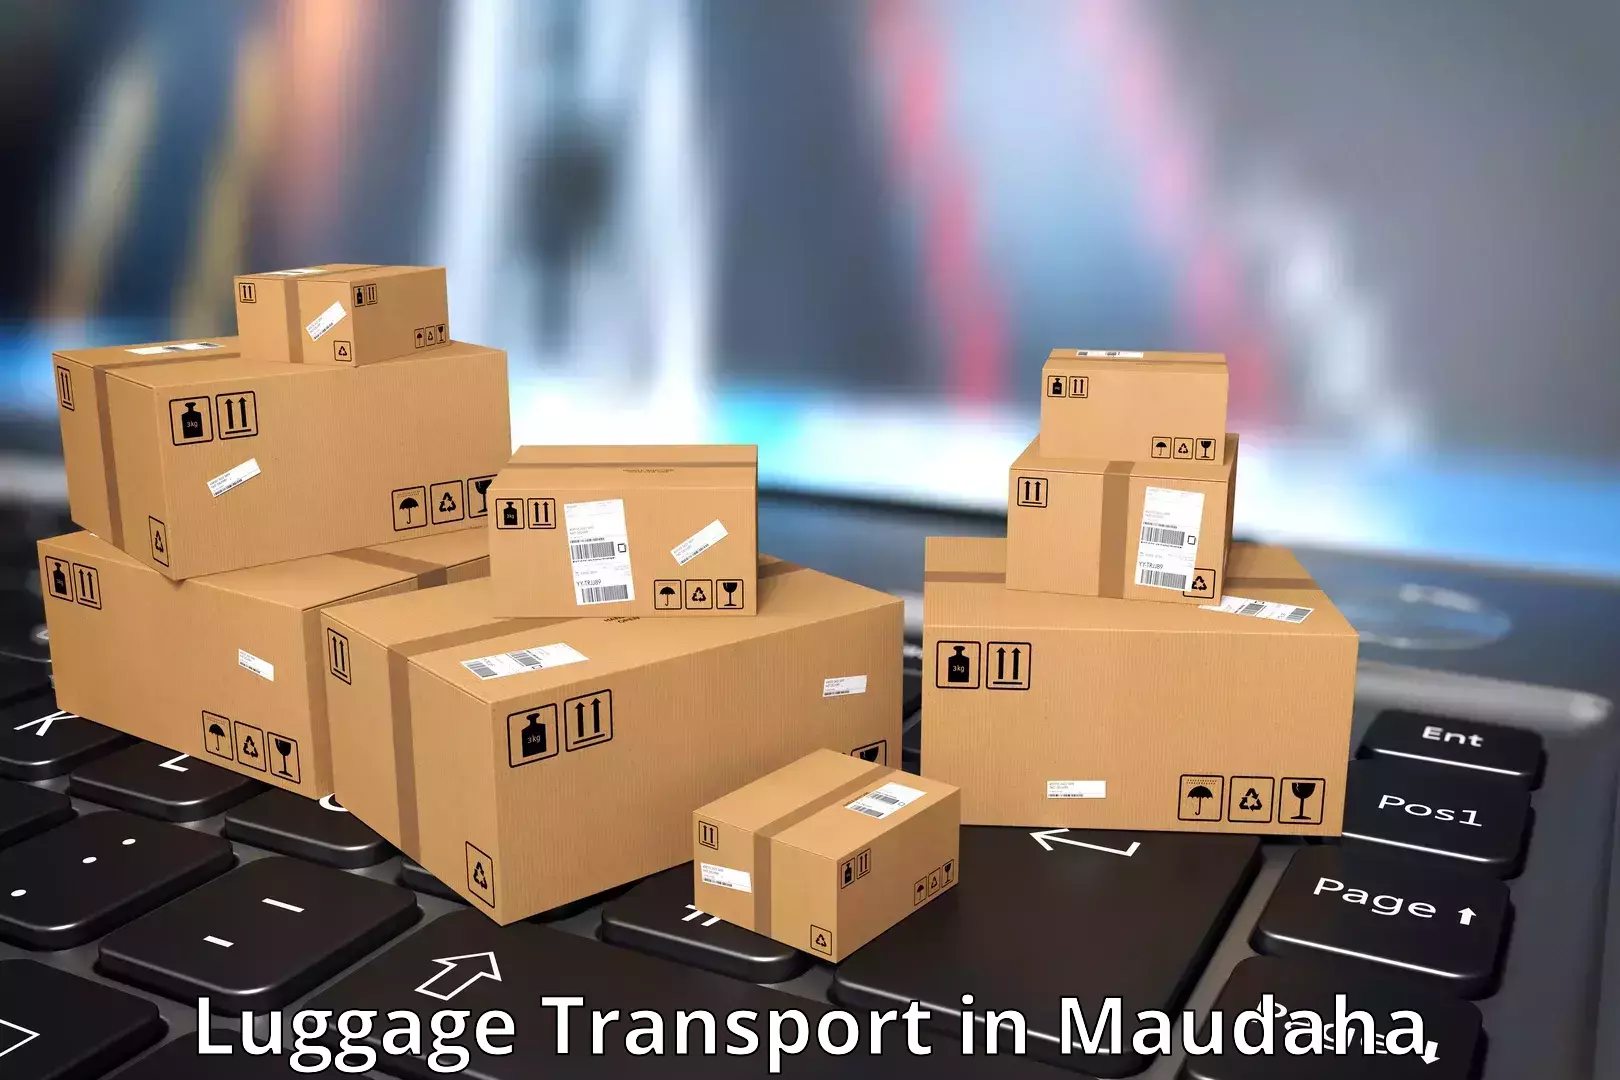 Customized luggage delivery in Maudaha